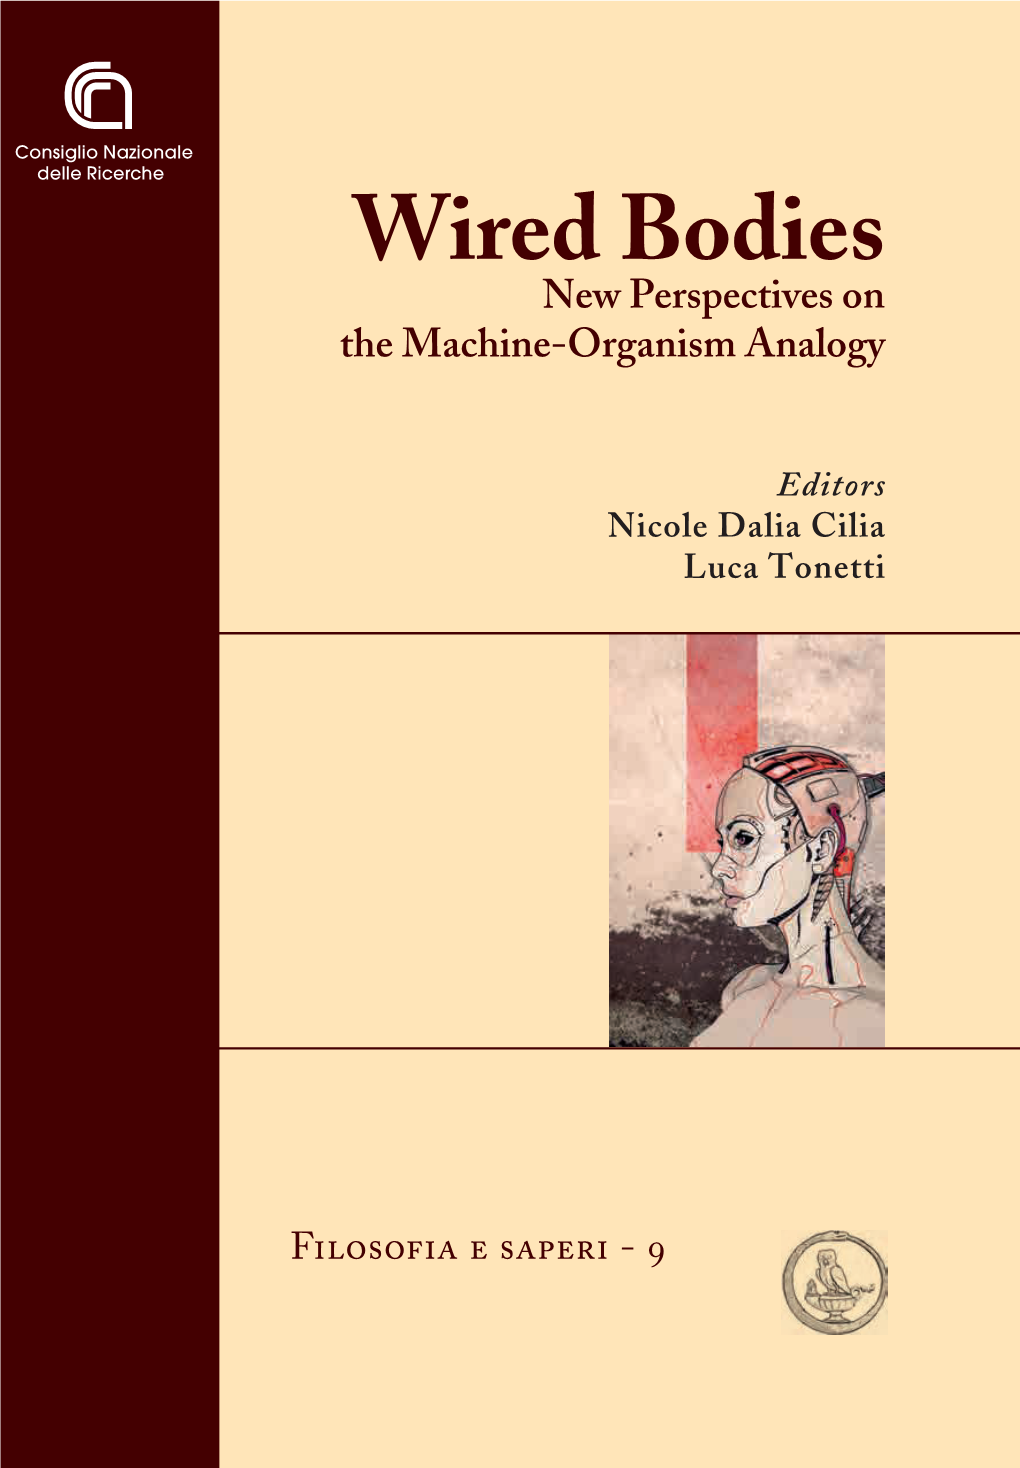 Wired Bodies, New Perspectives on the Machine-Organism Analogy, A